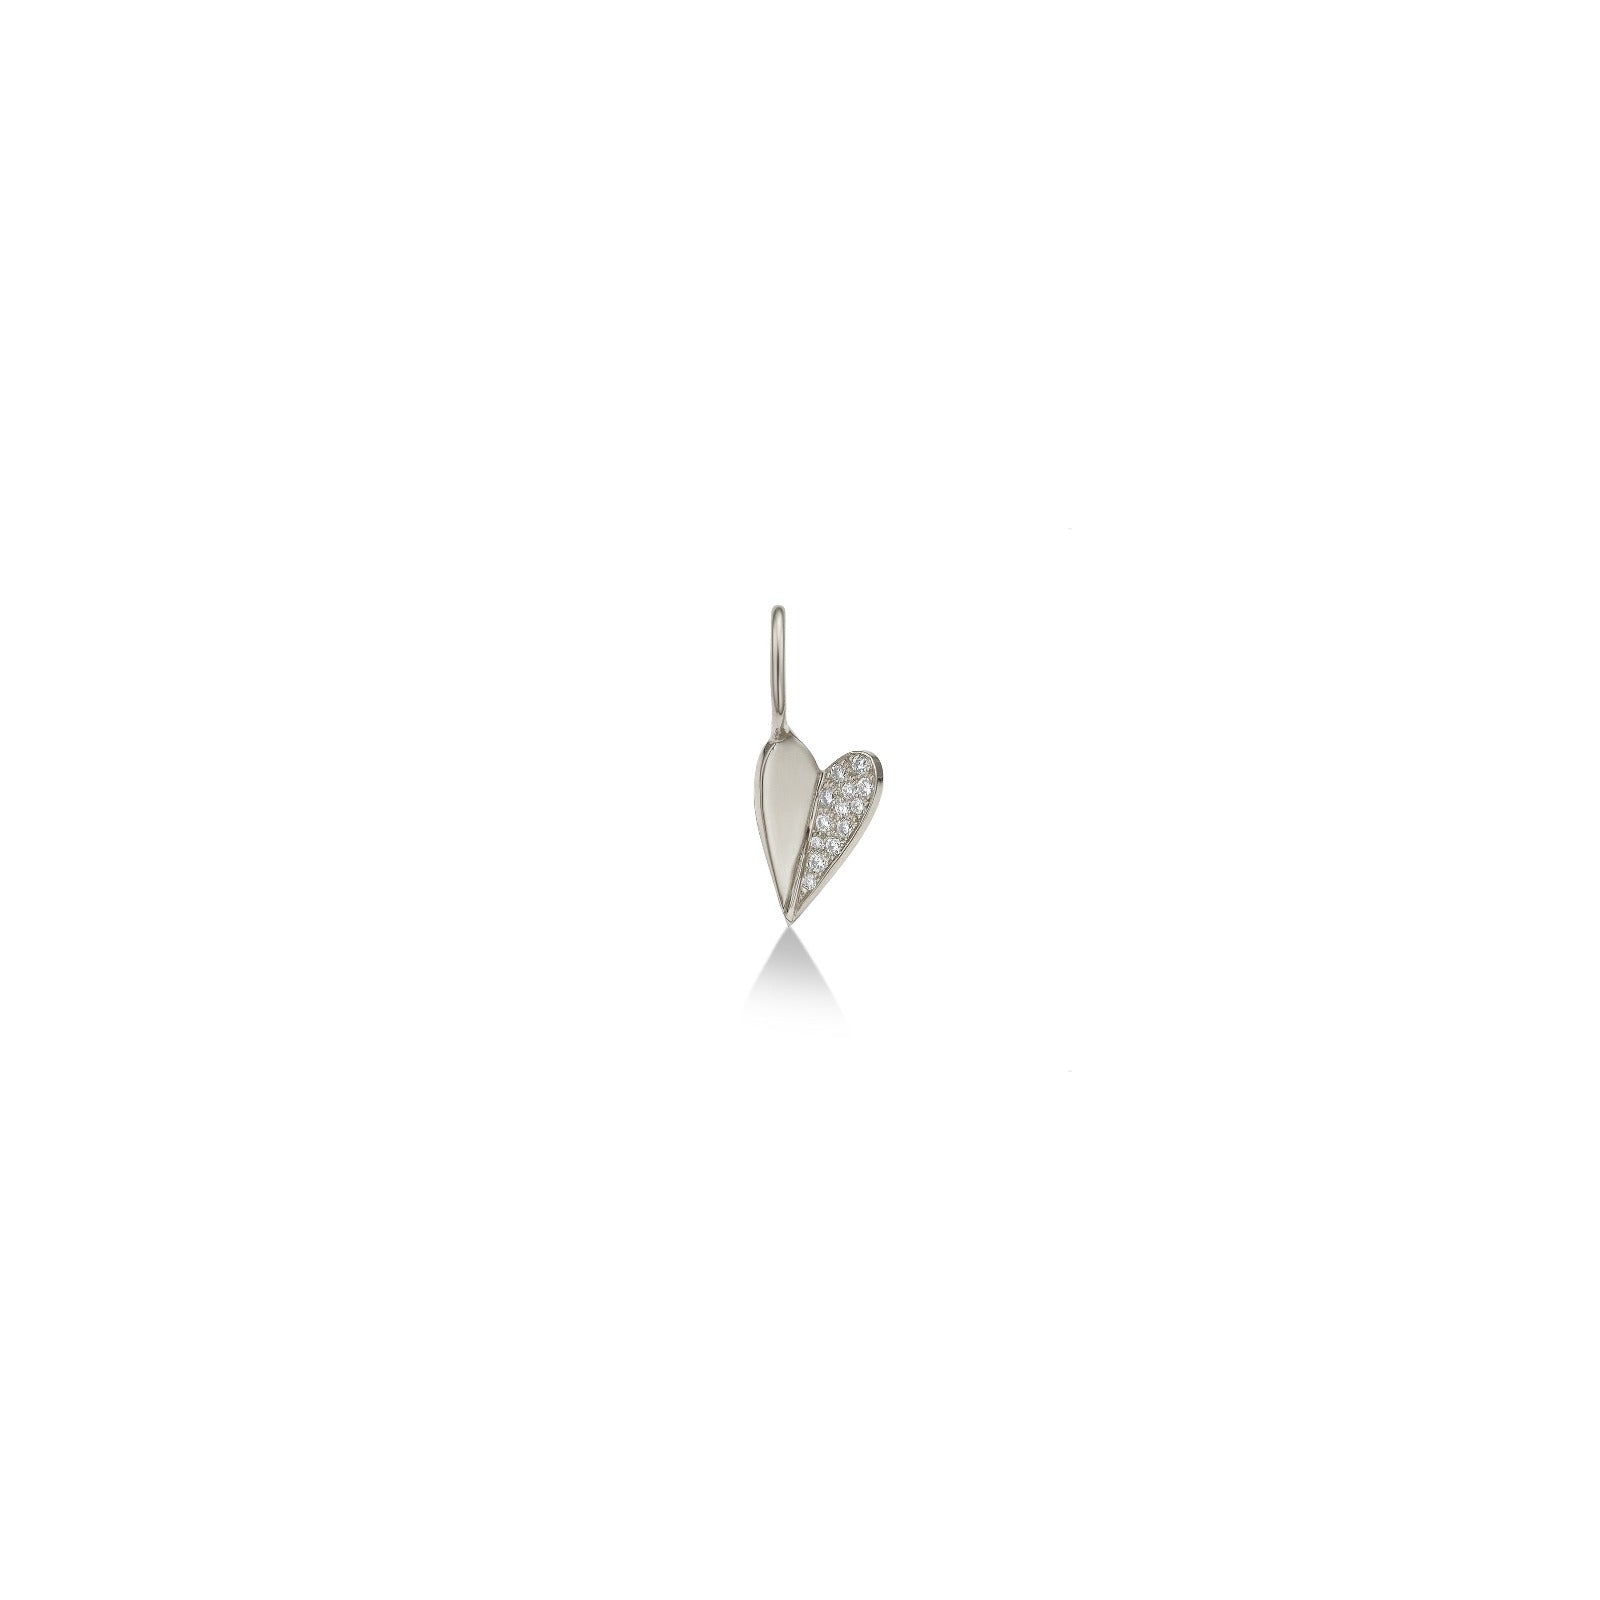 14k white gold small folded heart charm with pave diamonds on the right side.